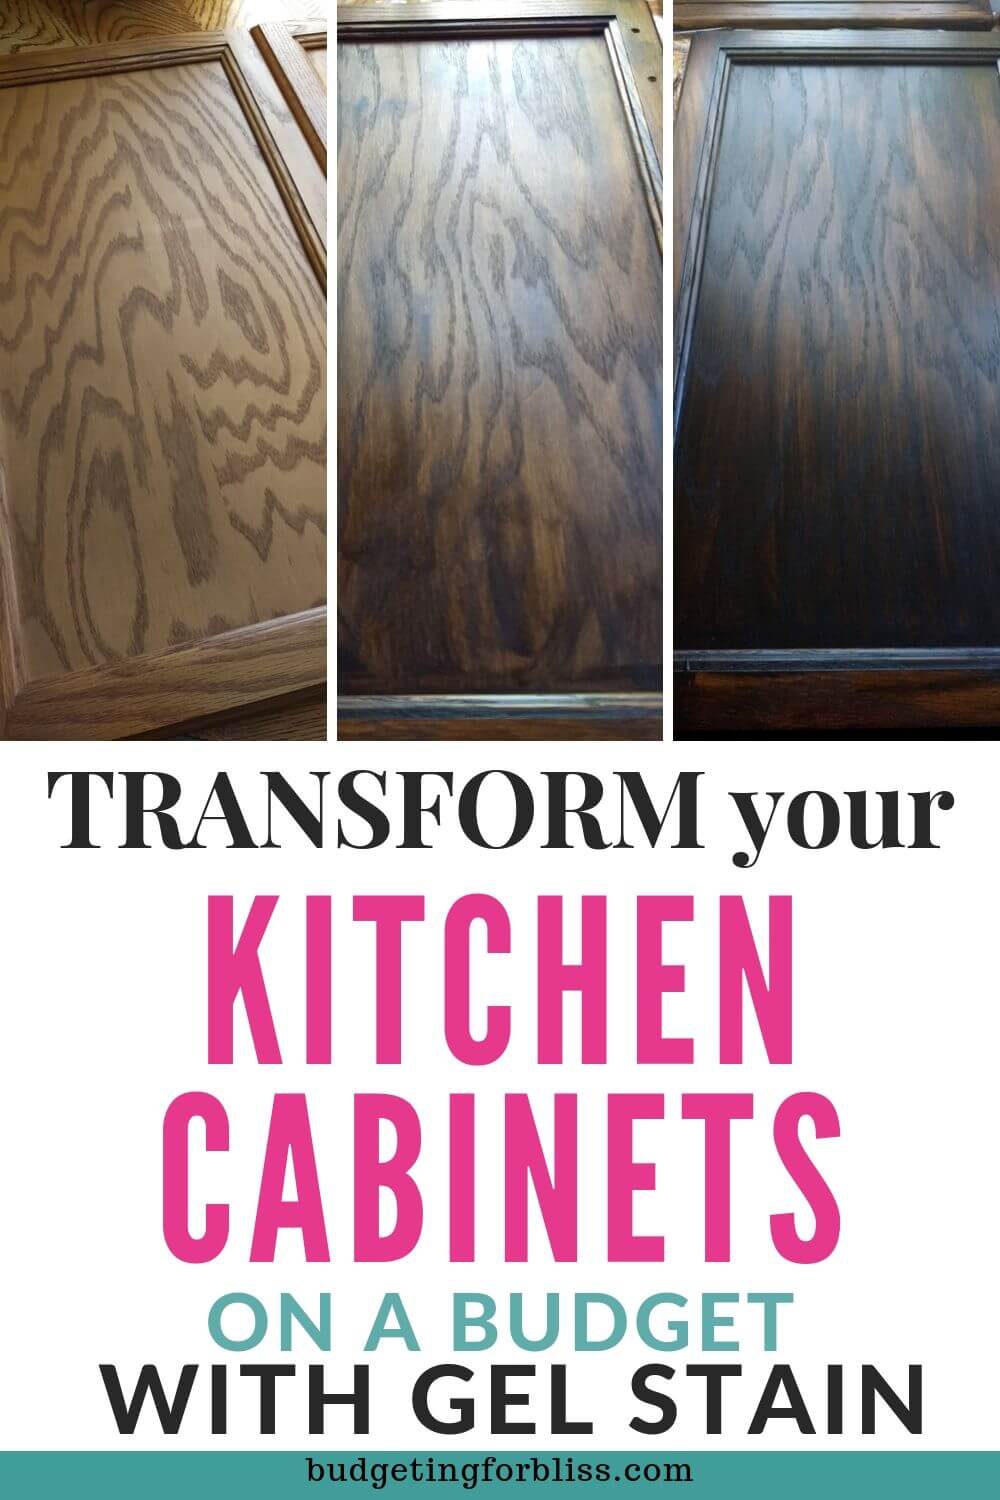 Gel Stain Your Cabinets On A Budget, What Is A Gel Stain For Cabinets